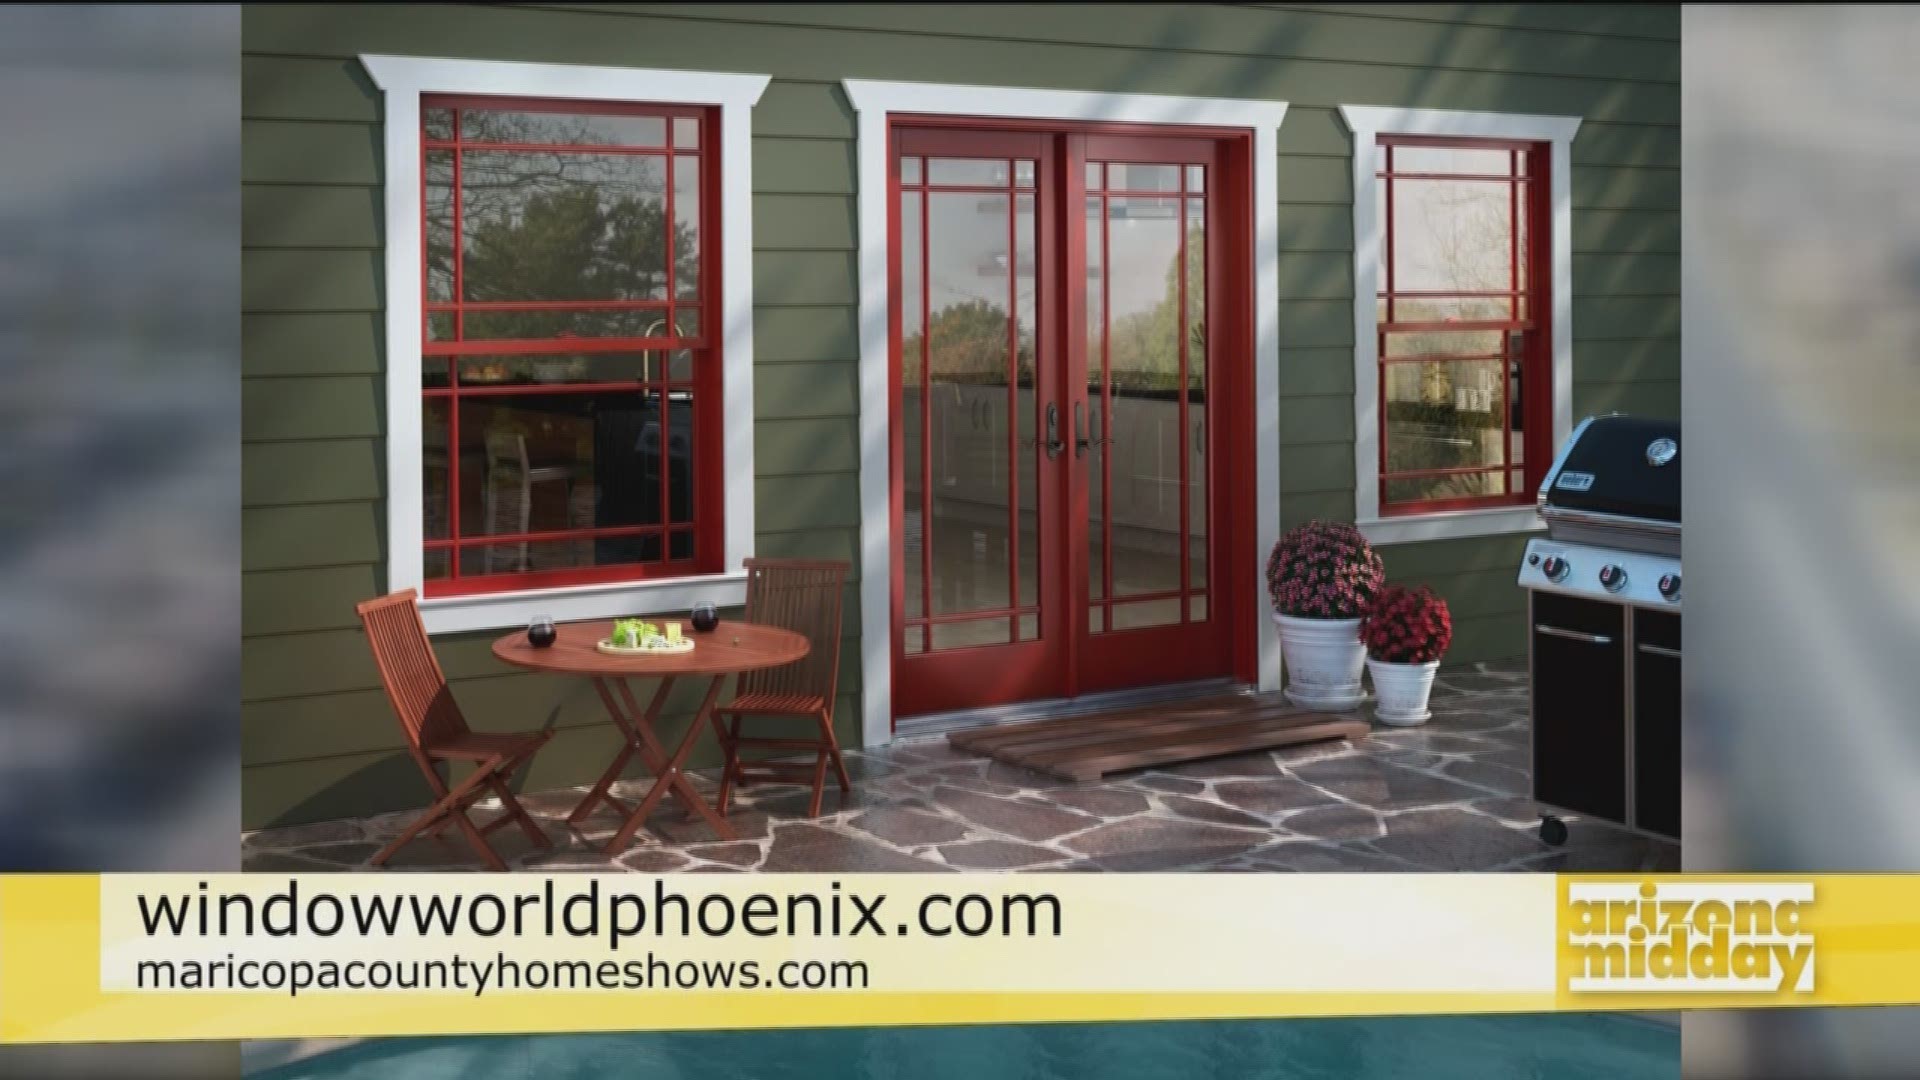 Keith Allen with Window World Phoenix tells us about this seasons home window trends and how we can get big discounts at the Maricopa County Home Show